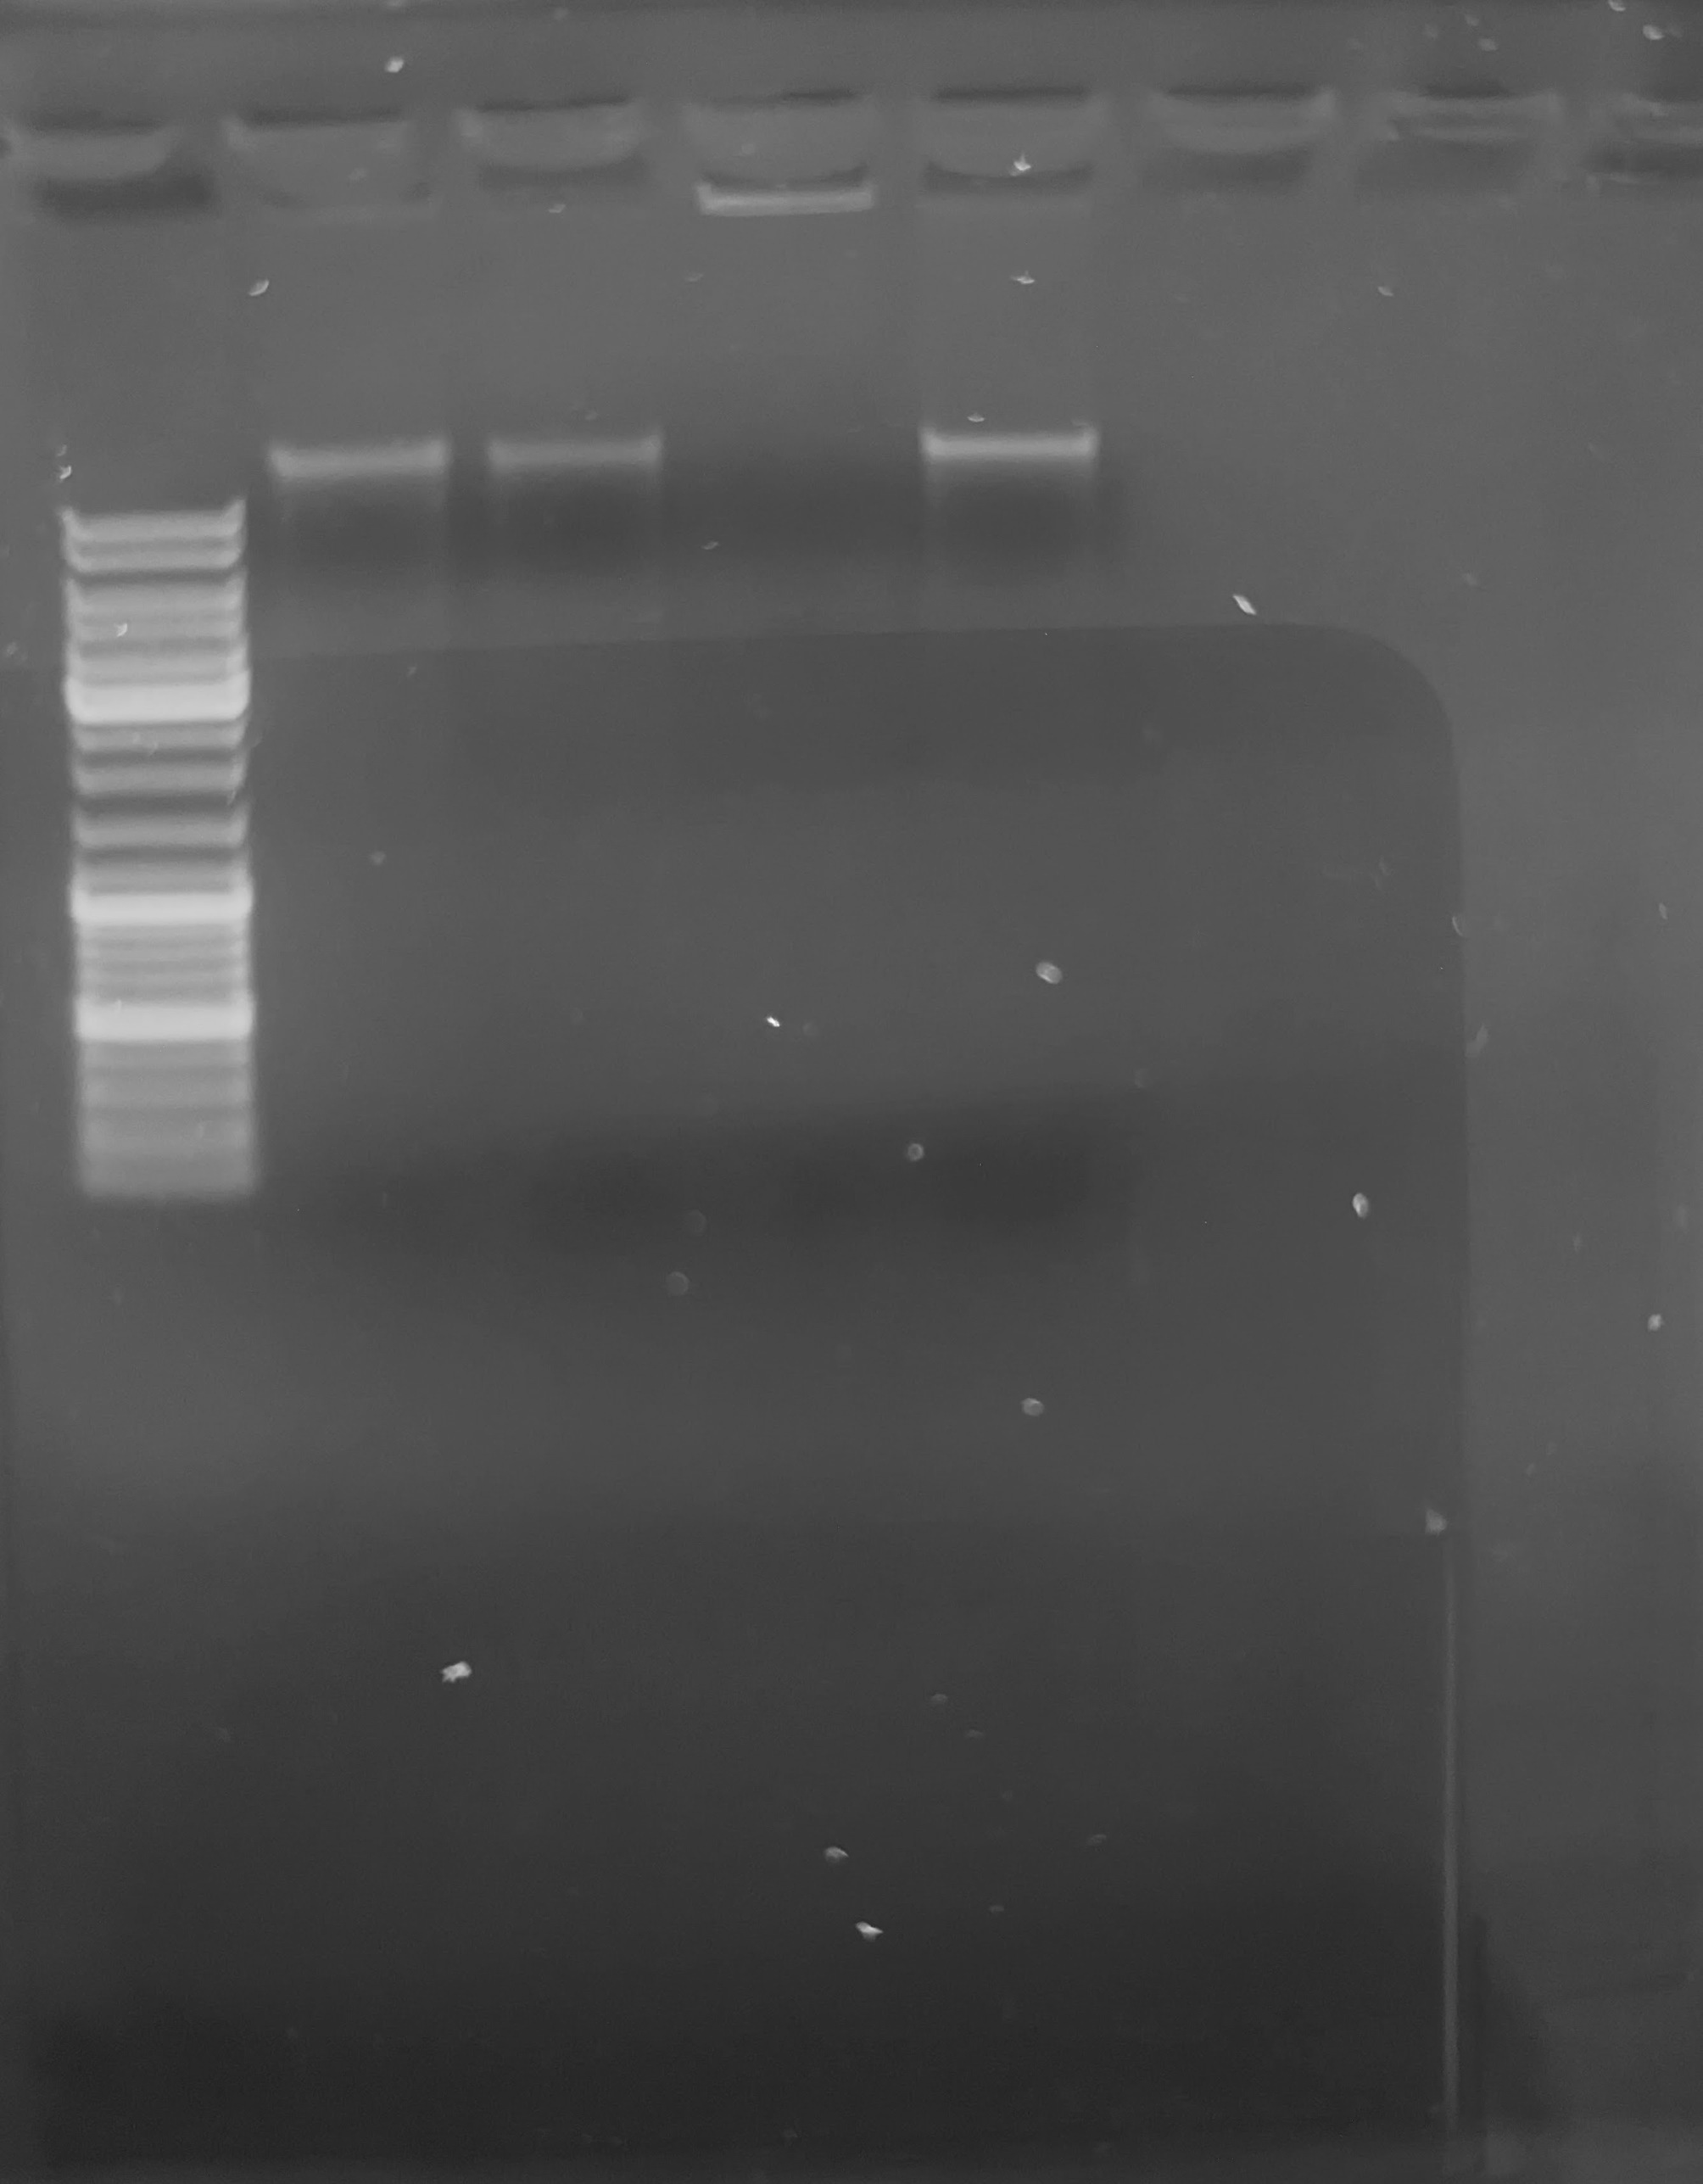 Gel image showing DNA ladder and high molecular weight bands for each of the four samples run. Sample 65B in Lane 4 appears to have a remarkably high band that has barely left the well.